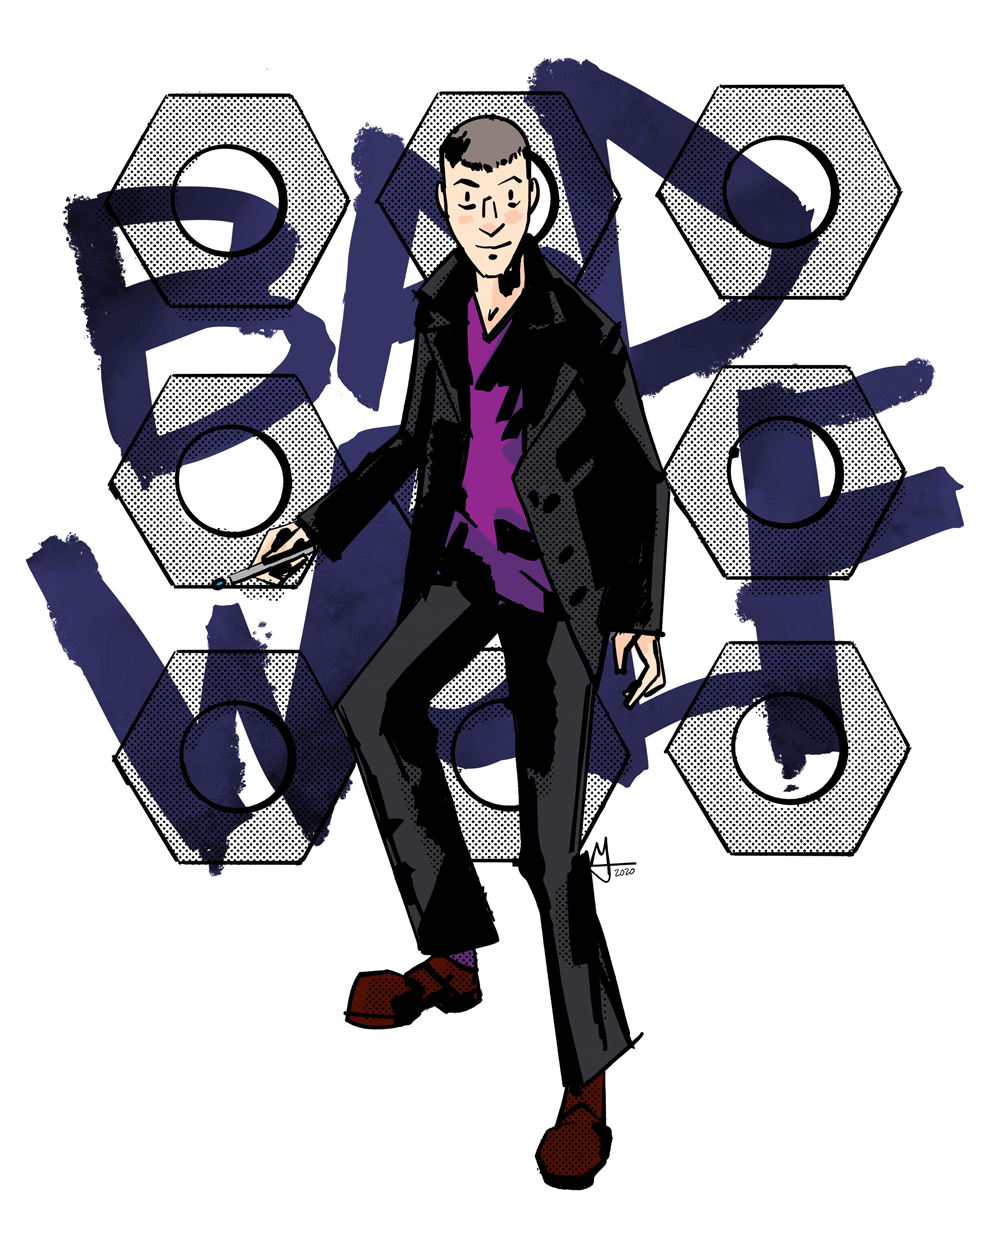 The Ninth Doctor is standing ready for action. He's wearing a leather jacket, brown pants, and a purple v-neck shirt. He has his sonic screwdriver in his right hand. Painted on the Tardis wall behind him are the words Bad Wolf.